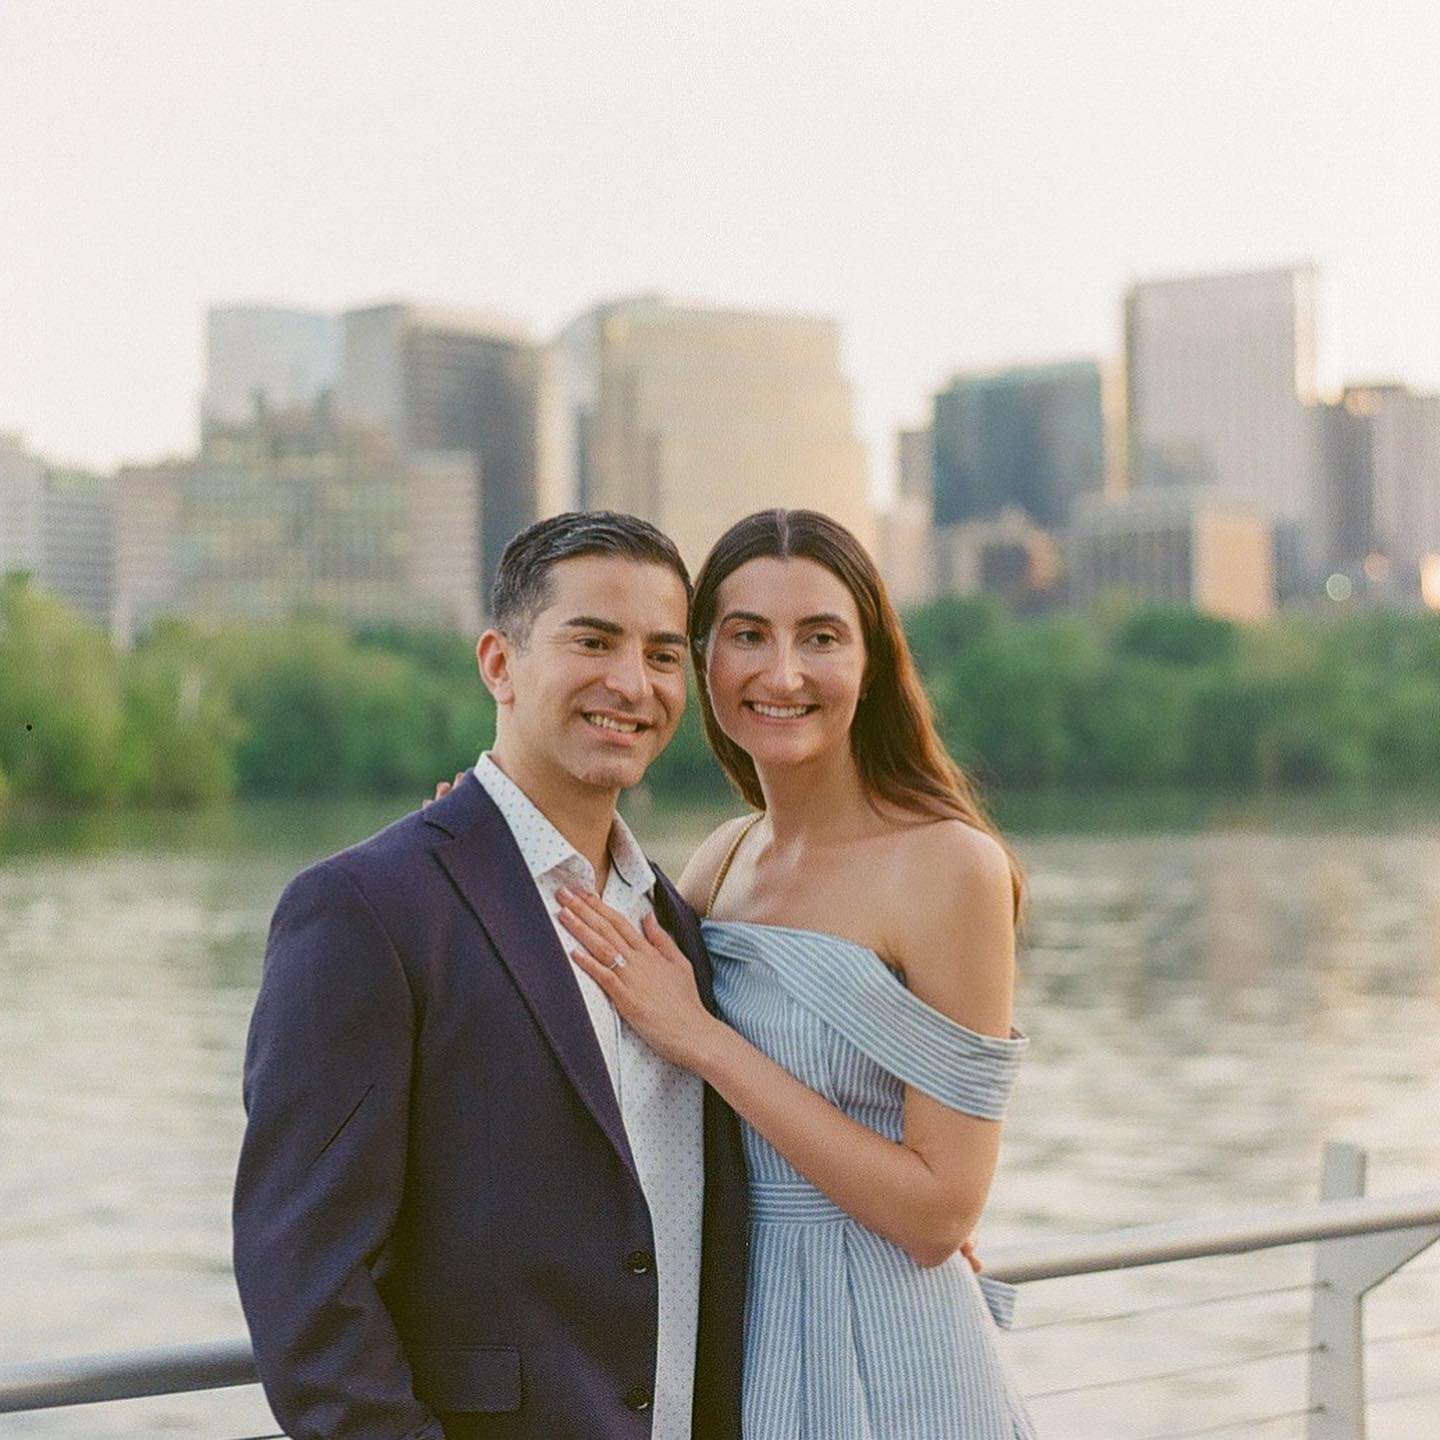 Loving a mix of film &amp; digital photography for engagements 🩵 Congrats to the lovely couple!

andreajanephotos.com

#virginiaweddingphotographer #washingtondcweddingphotographer #marylandweddingphotographer #newyorkweddingphotographer #northernvi